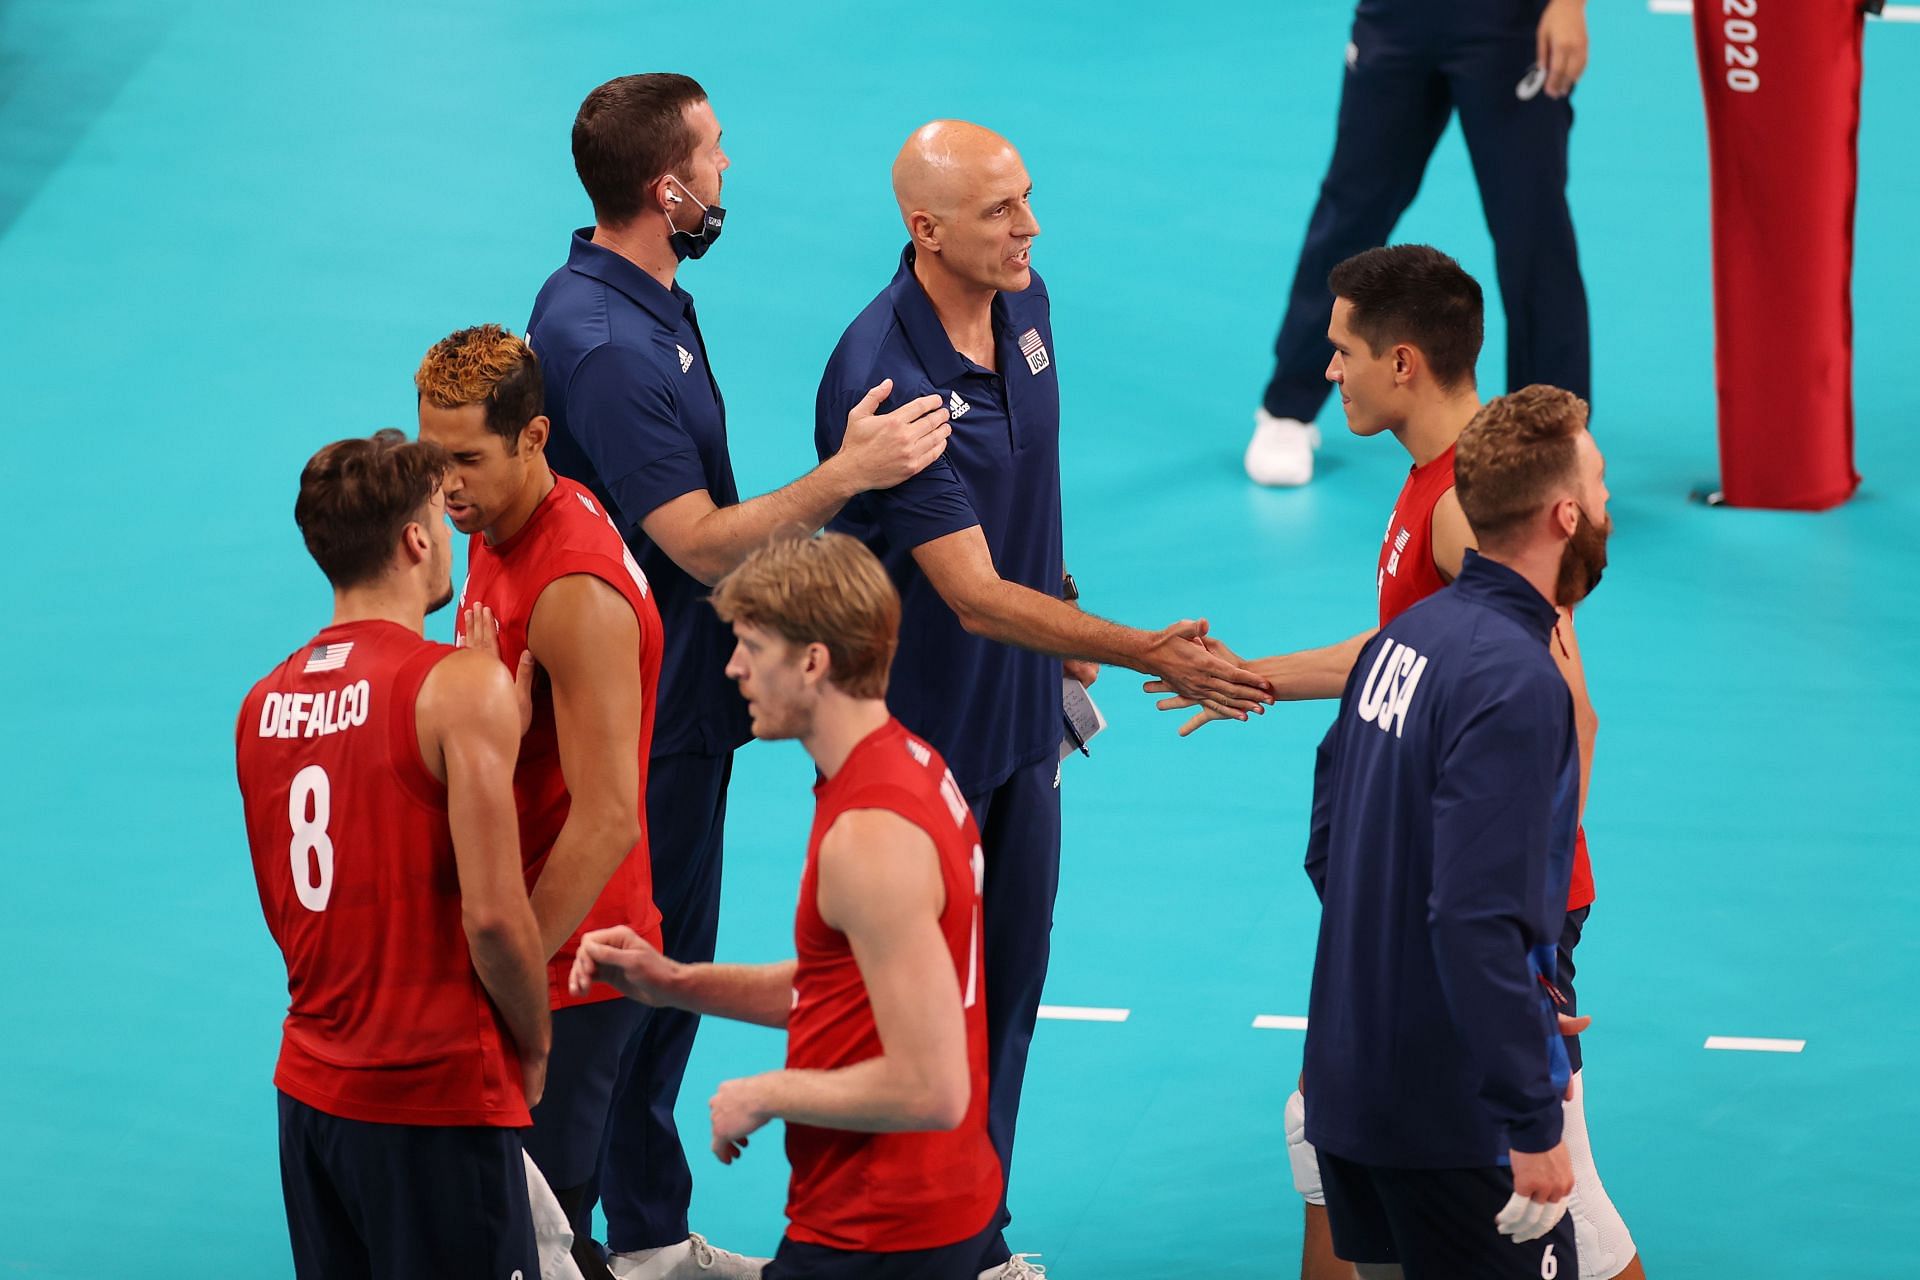 5 teams to watch at Volleyball Mens World Championship 2022